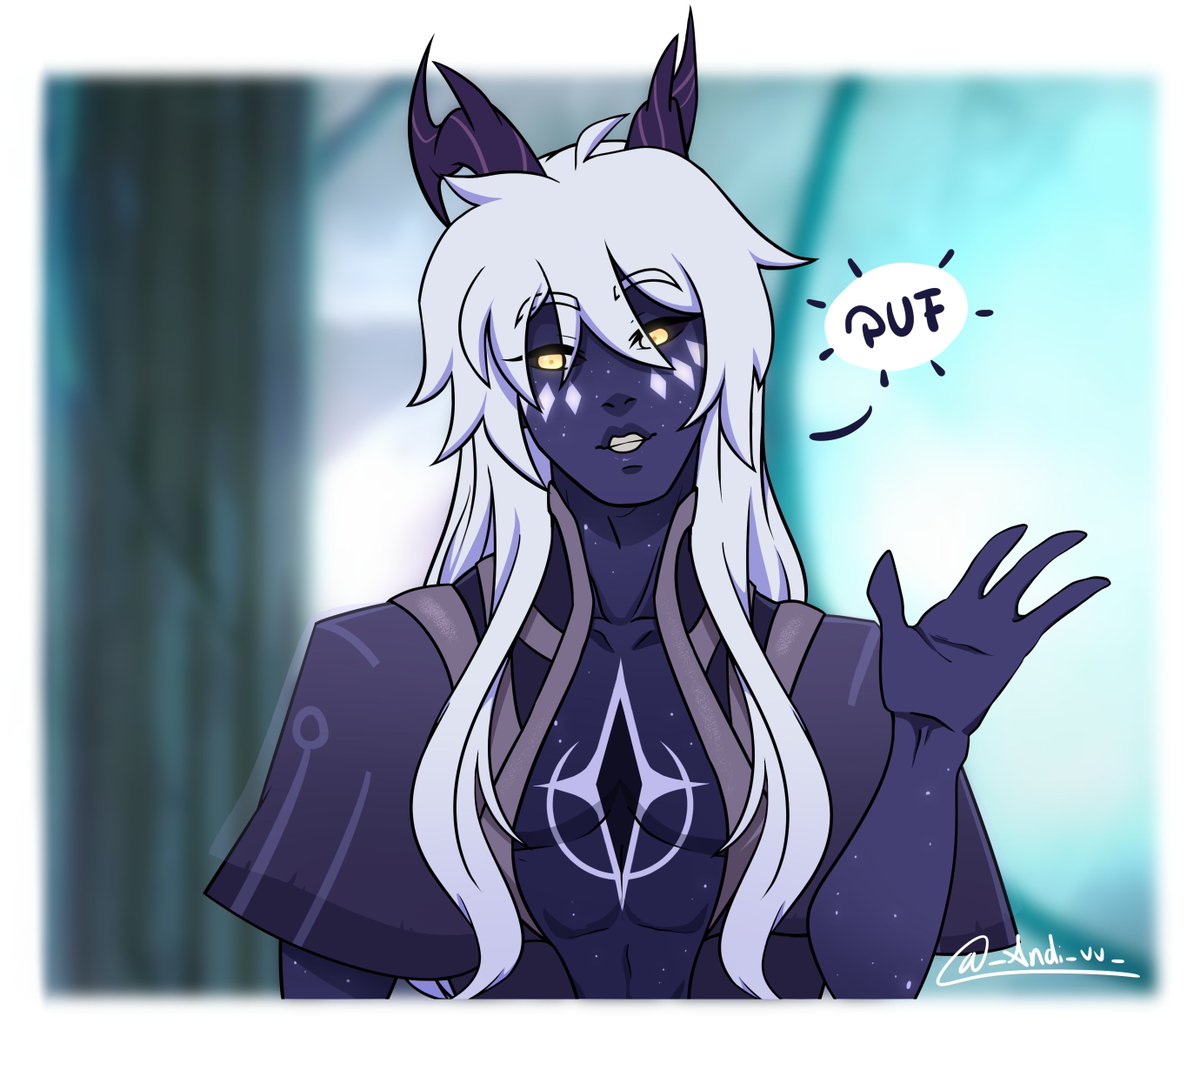 'Just a few hours left before your life expires. Poof!'

#TheDragonPrince #Aaravos #TheDragonPrinceFanart